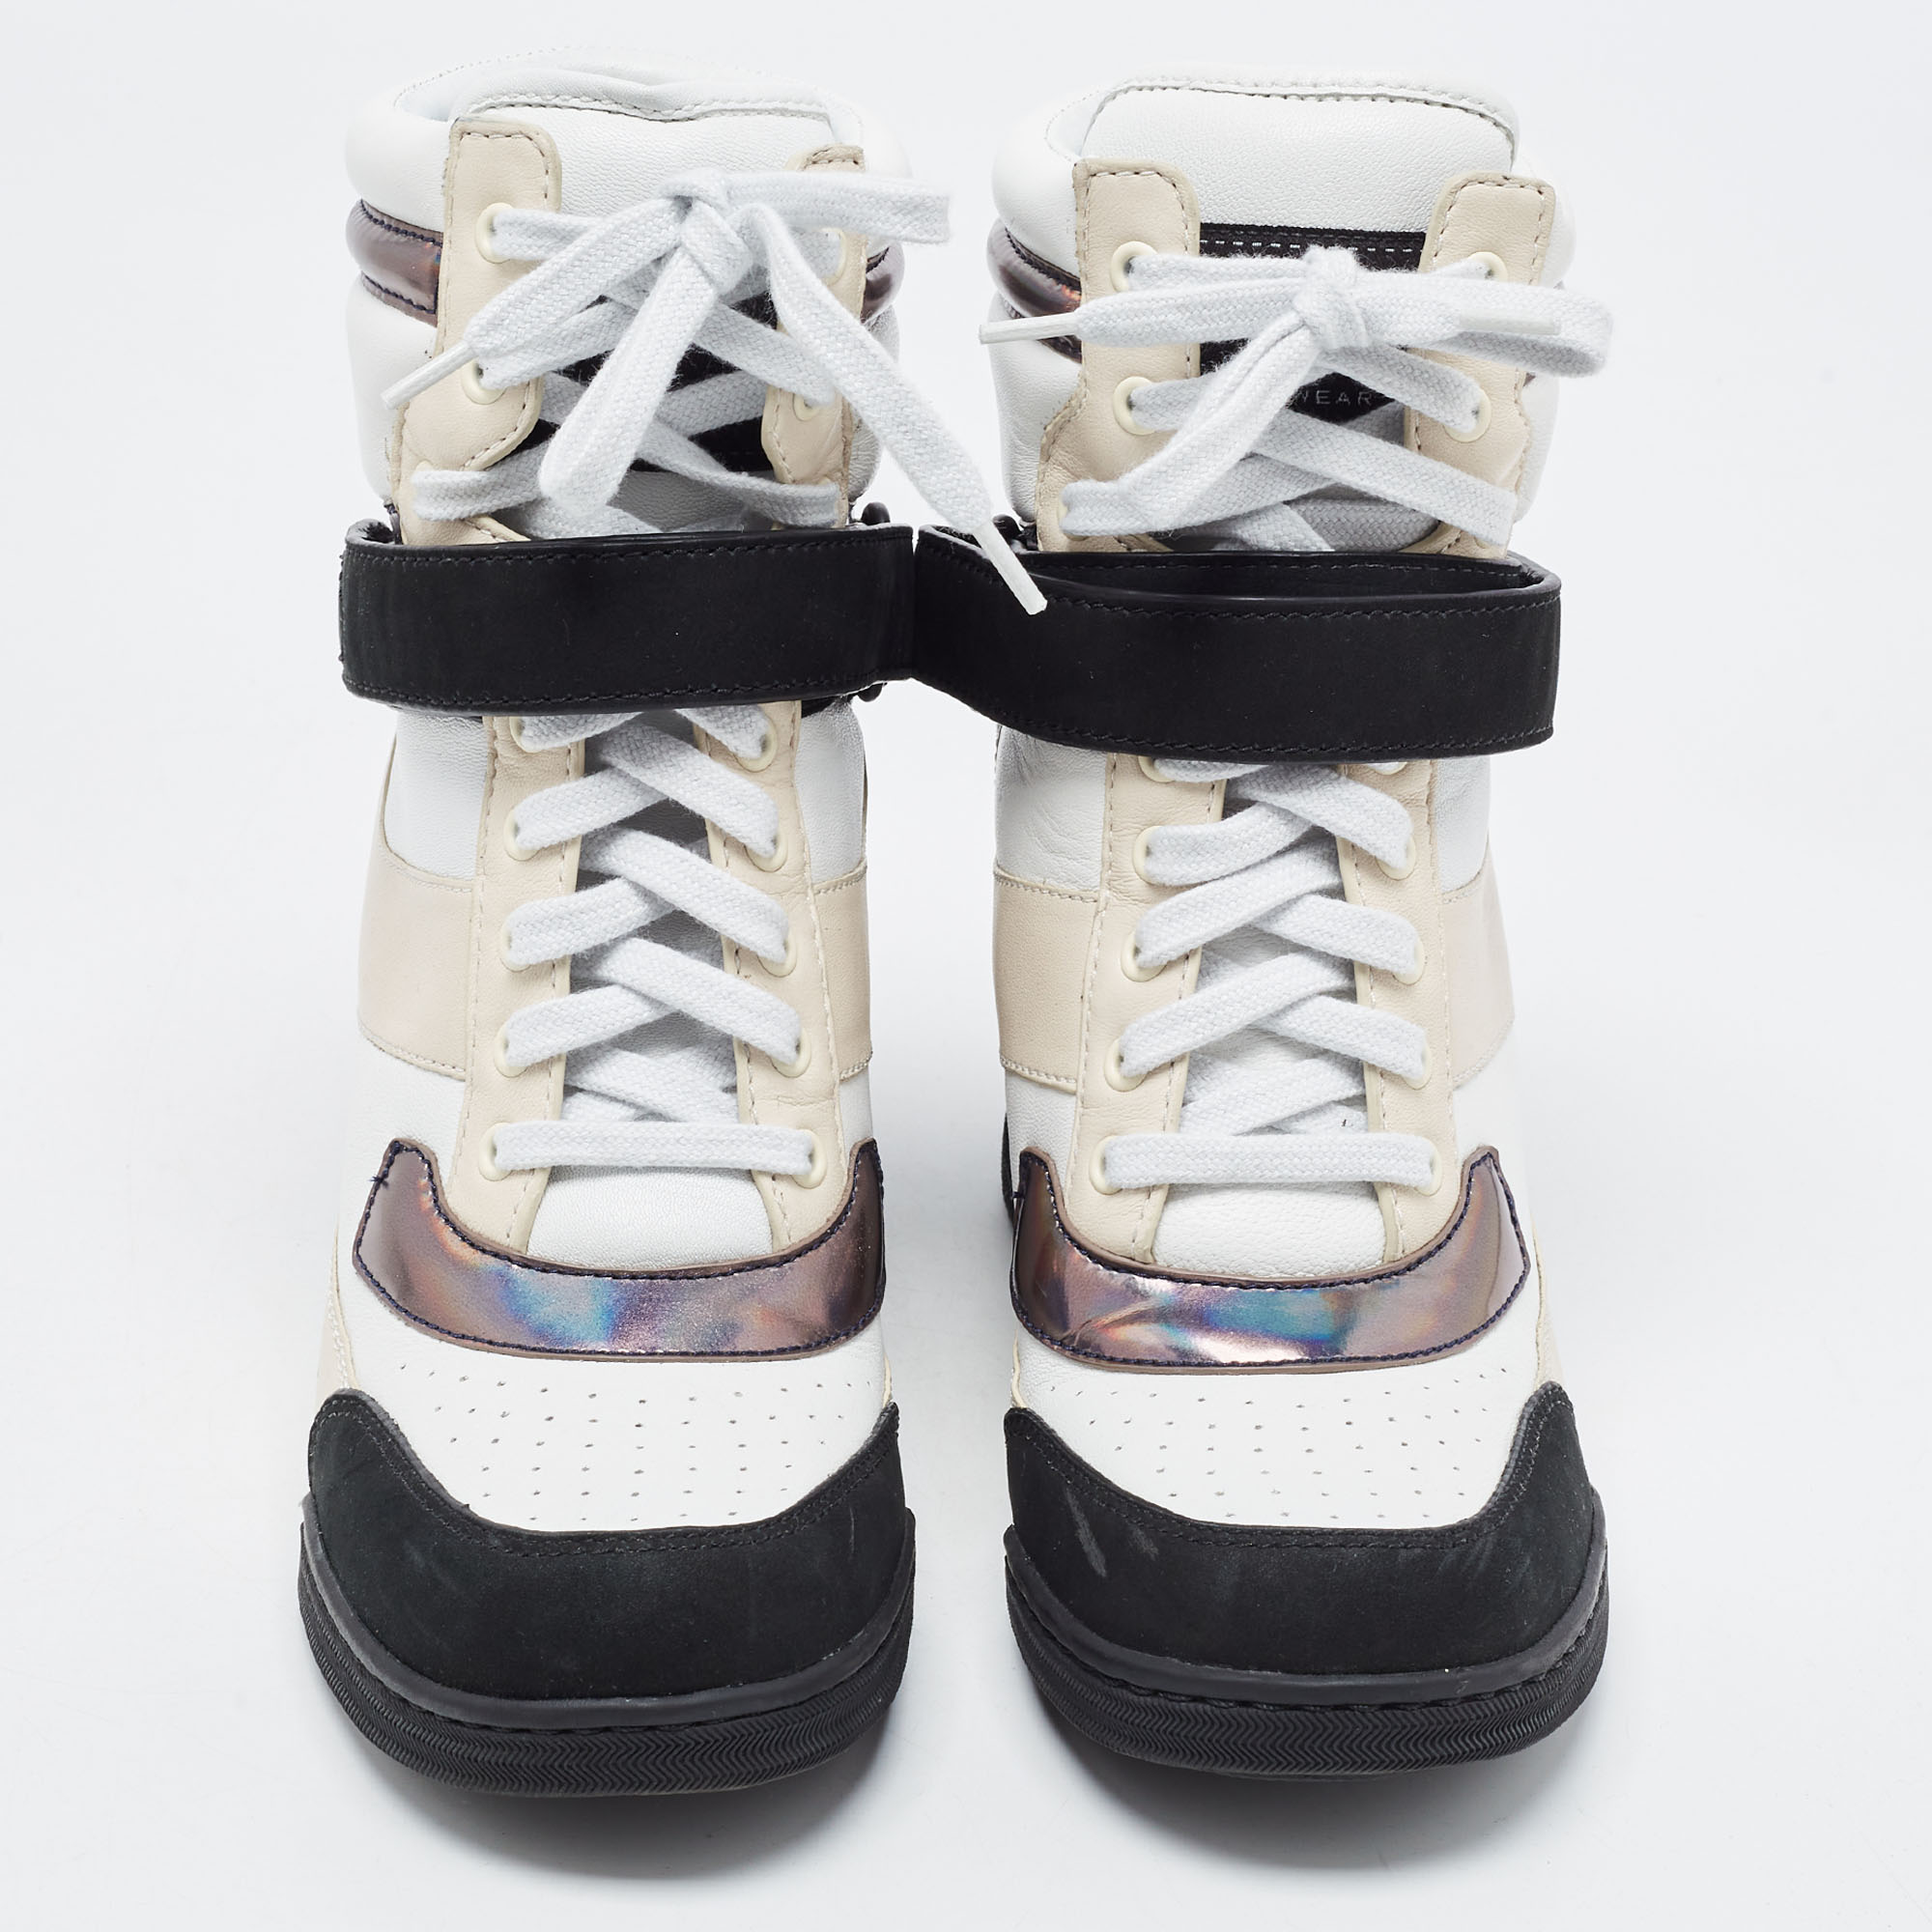 Marc By Marc Jacobs Tri Color Leather Lace Up Wedge Sneakers Size 38